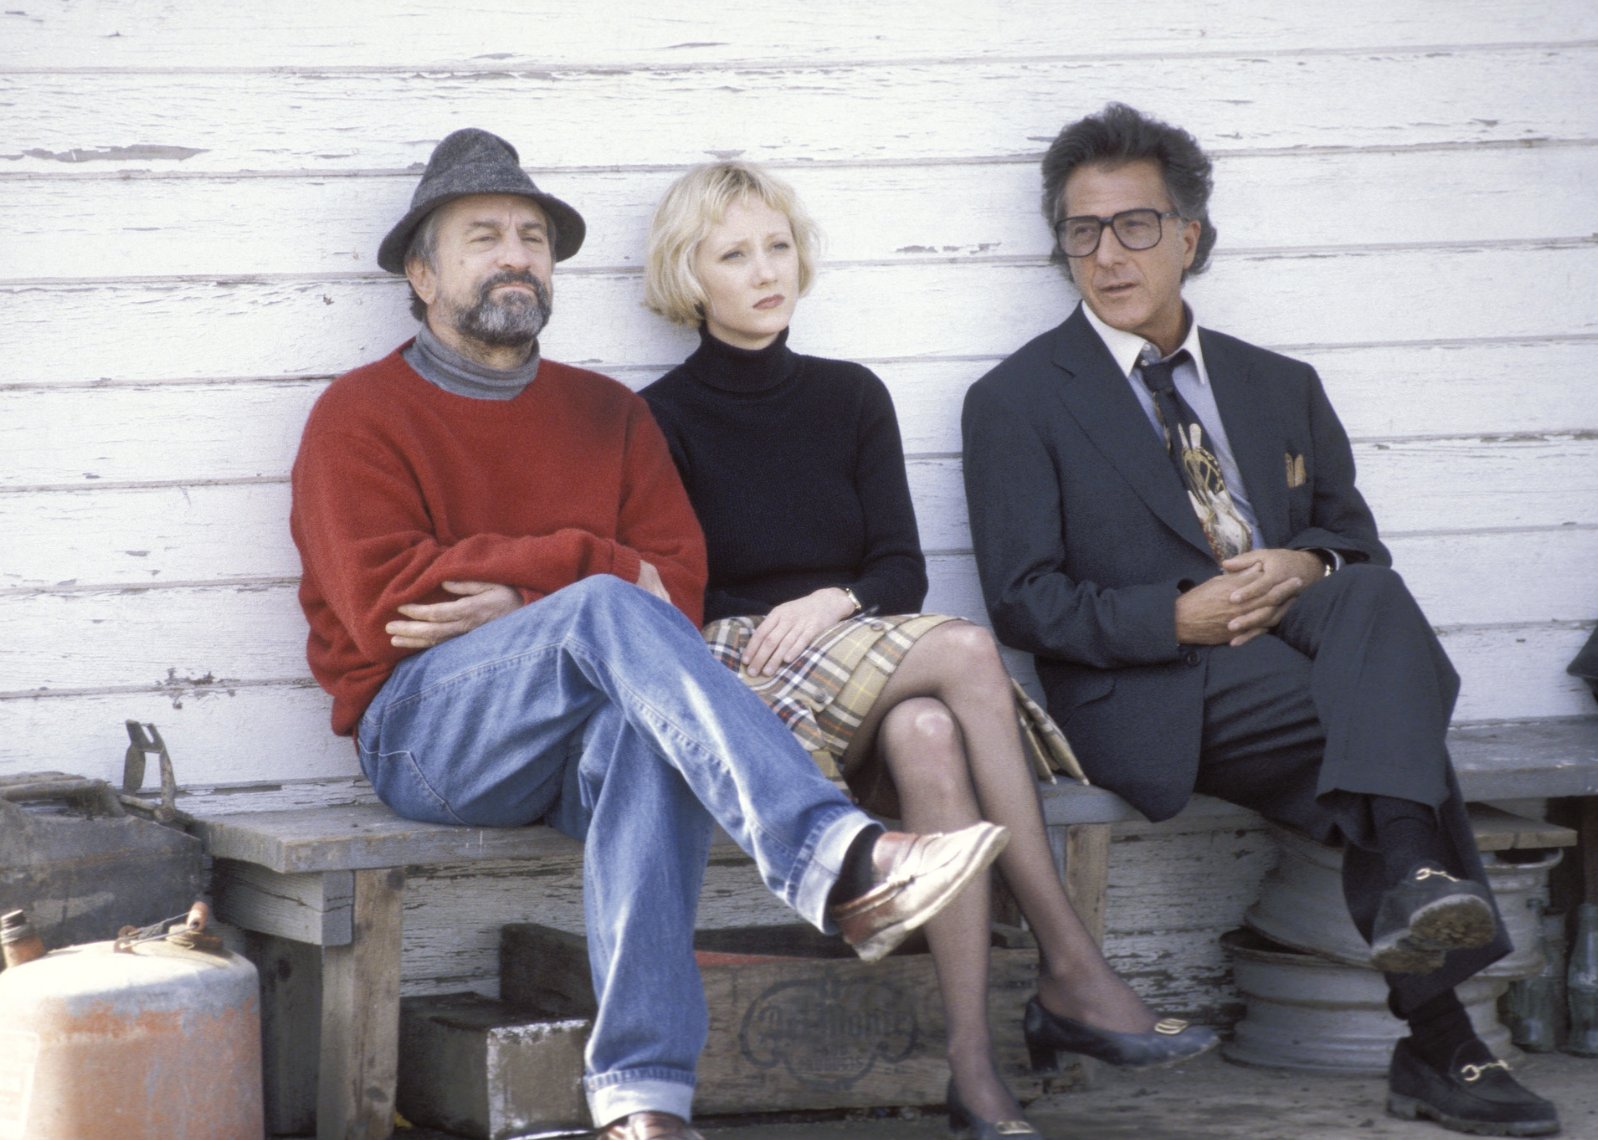 Robert De Niro, Anne Heche, and Dustin Hoffman in "Wag the Dog"